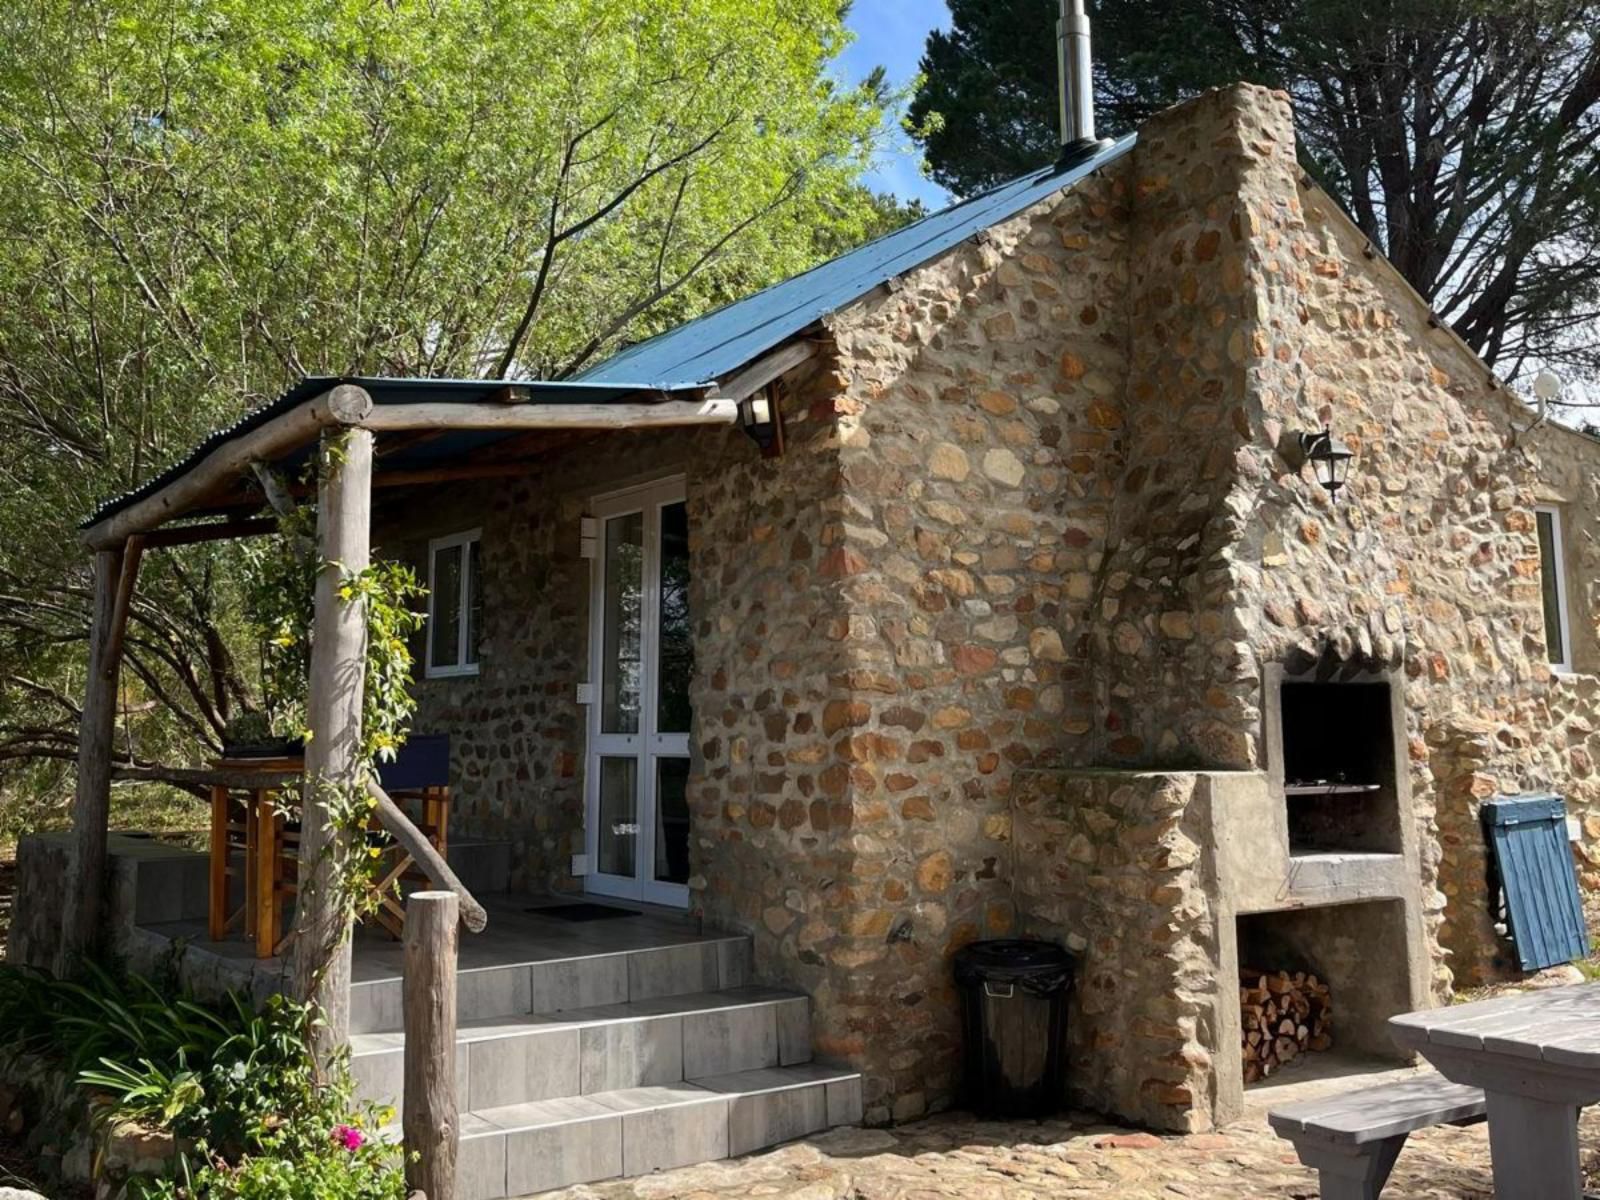 Welbedacht Game And Nature Reserve Tulbagh Western Cape South Africa Building, Architecture, Cabin